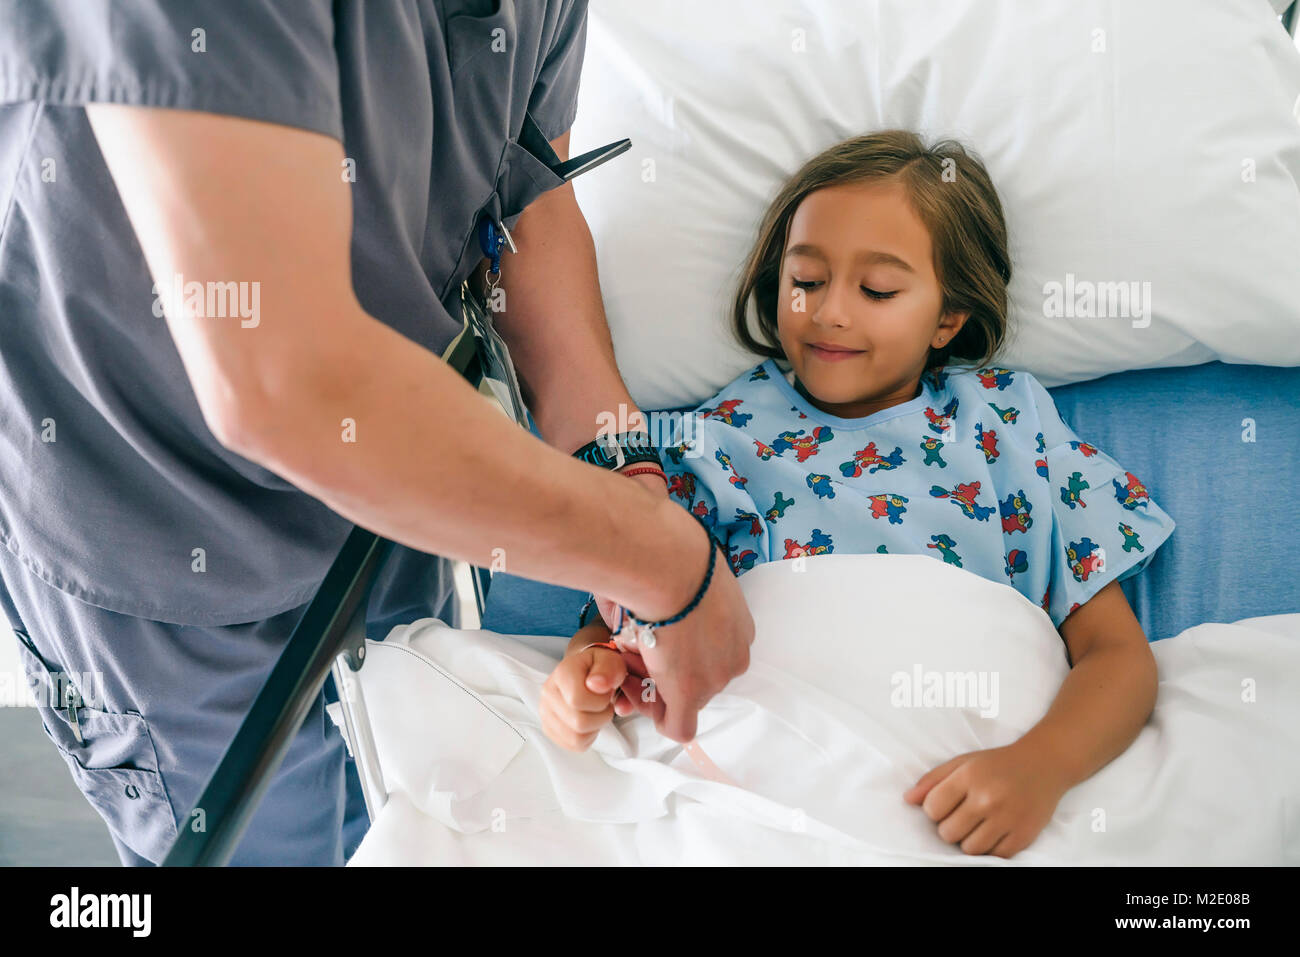 Doctor holding hand of girl in hospital bed Stock Photo